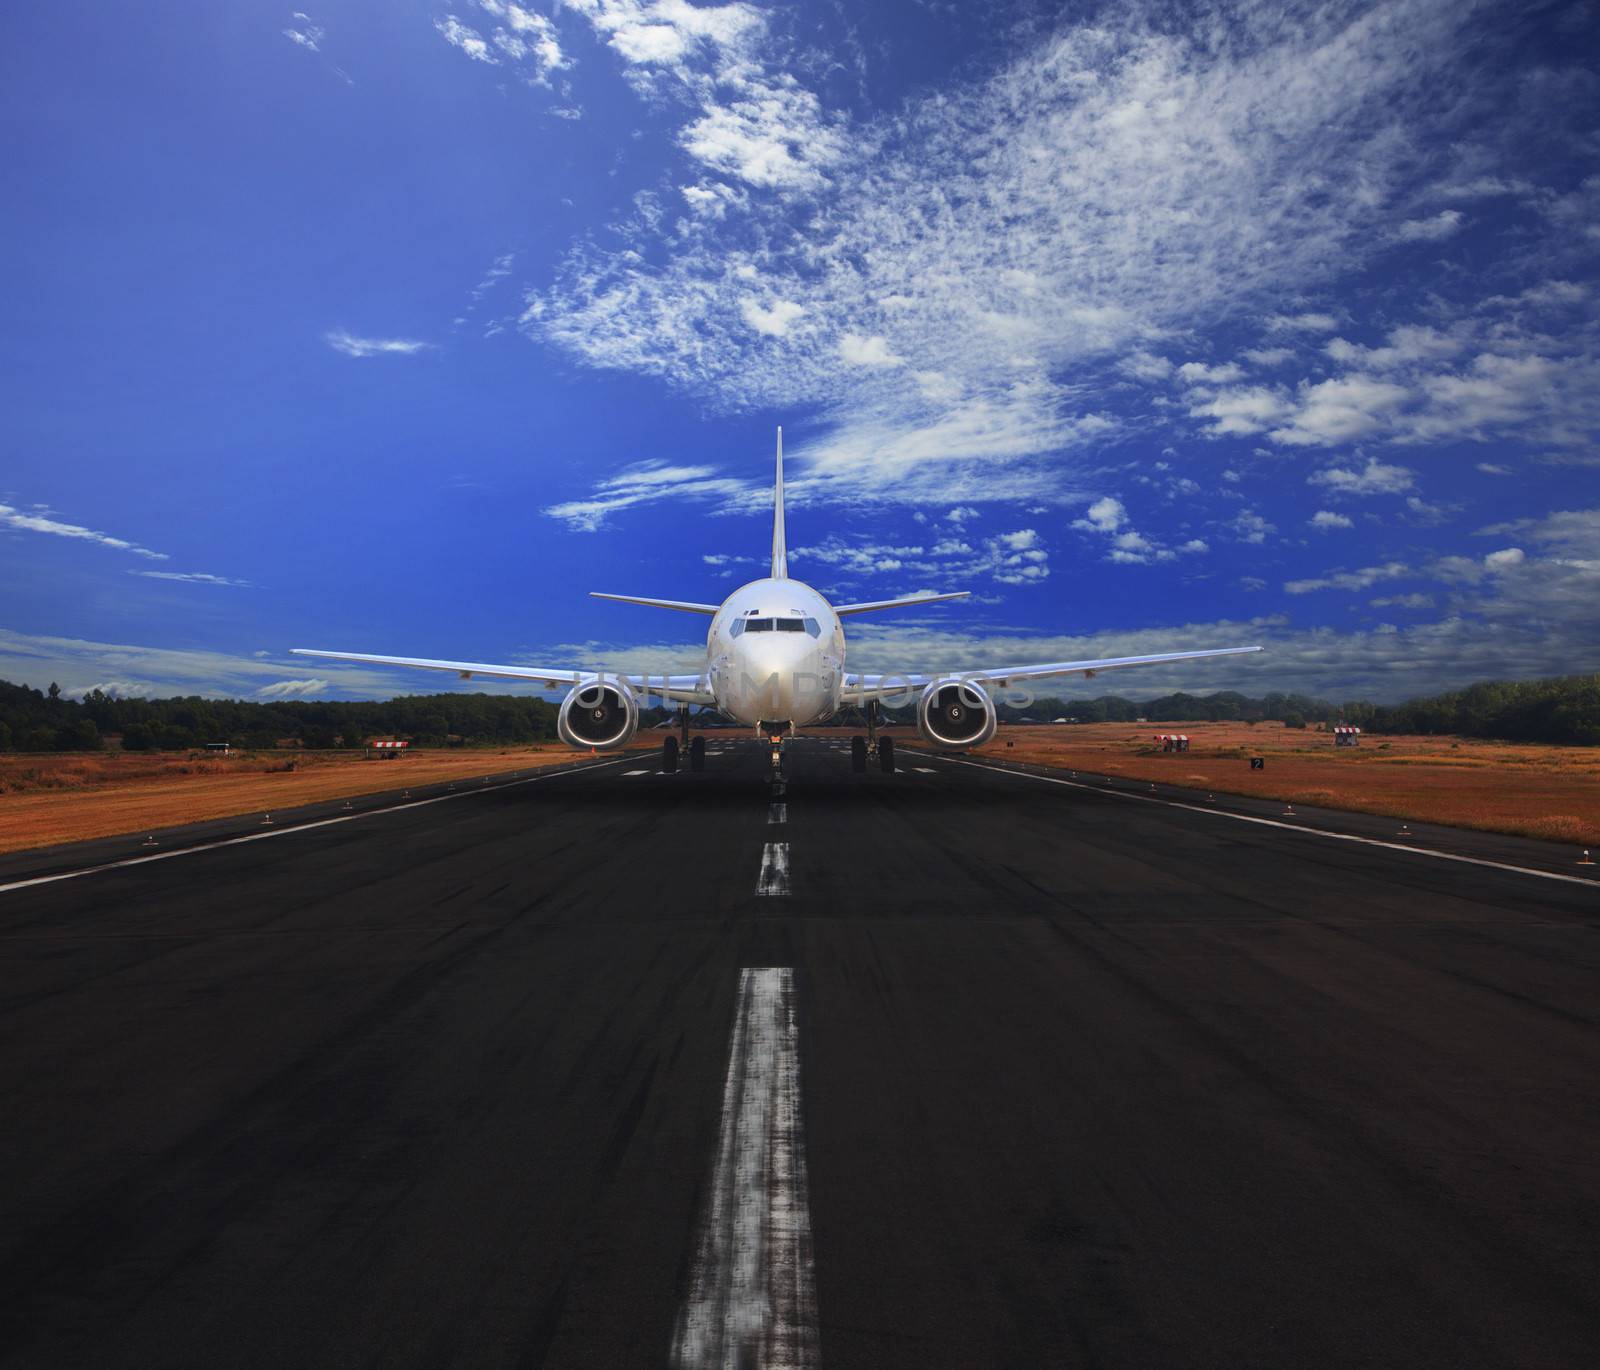 passenger air plane running on airport runway with beautiful blue sky with white cloud use for transport and traveling journey background